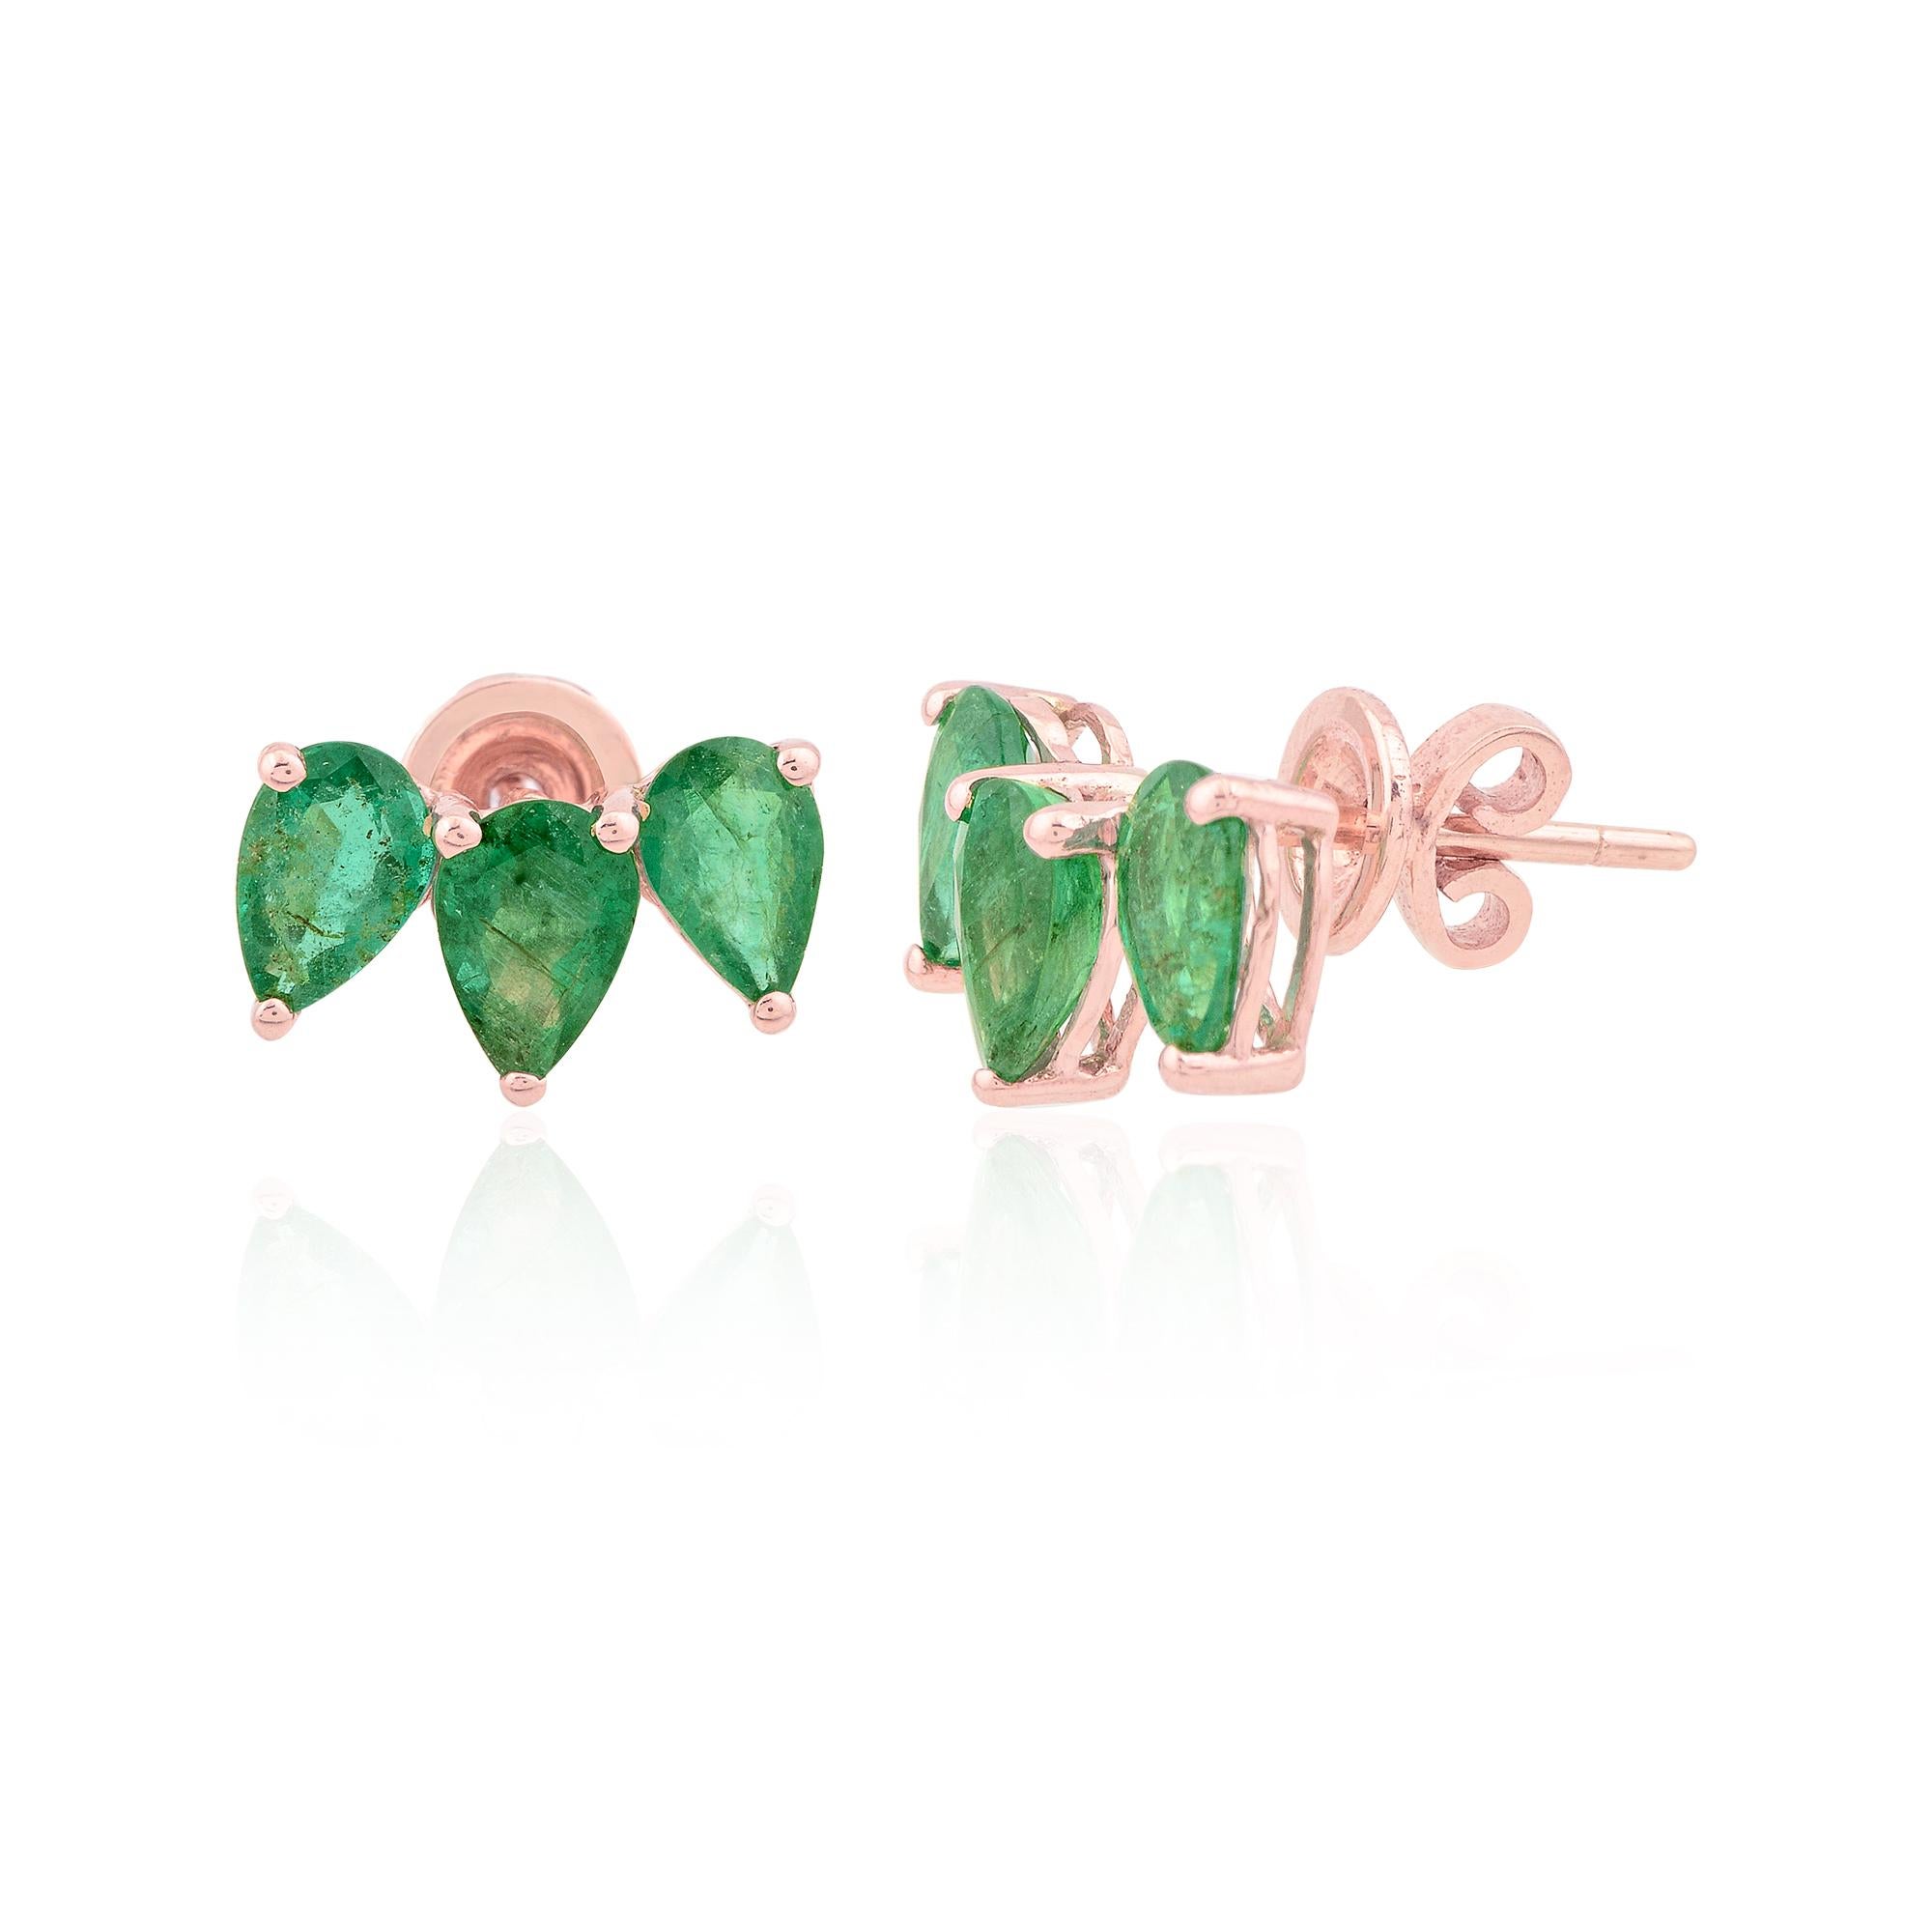 Item Code :- STE-1106B
Gross Wt. :- 2.12 gm
10k Solid Rose Gold Wt. :- 1.65 gm
Natural Pear Emerald Wt. :- 2.34 Ct. 
Earrings Size :- 11.50 mm approx.

✦ Sizing
.....................
We can adjust most items to fit your sizing preferences. Most